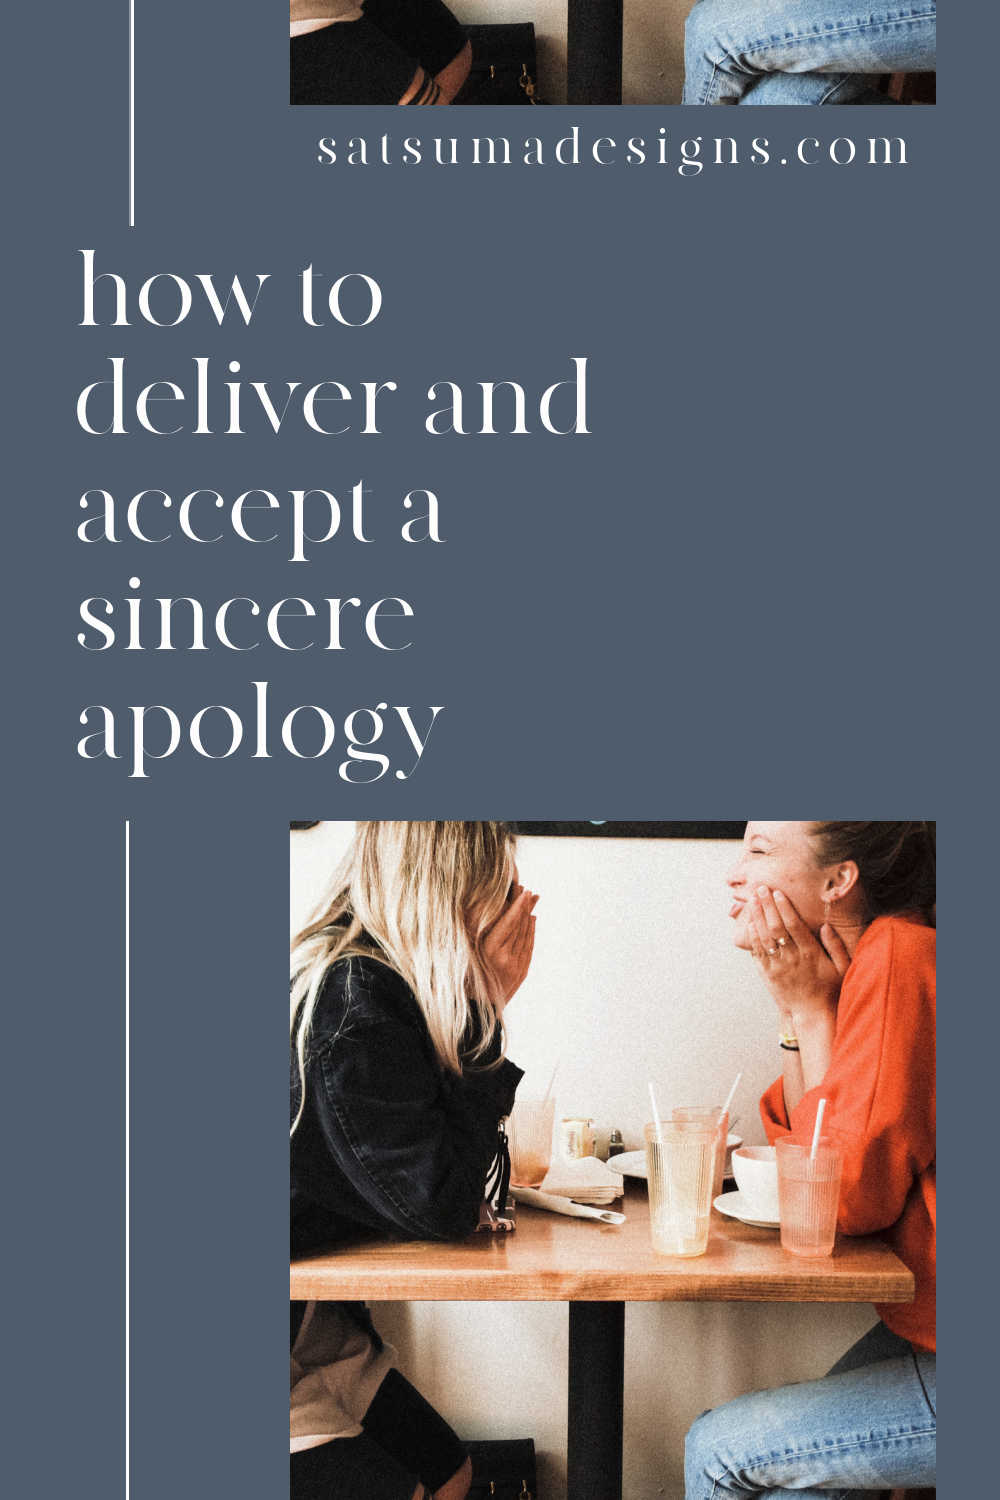 How to deliver and accept a sincere apology. Sadly, relationship struggles are a part of life, but we don't have to hold onto the pain when we can accept a sincere and thoughtful apology. Discover how to make an apology that will begin to heal relationships. #relationships #etiquette #businessskills #lifeskills #partnership